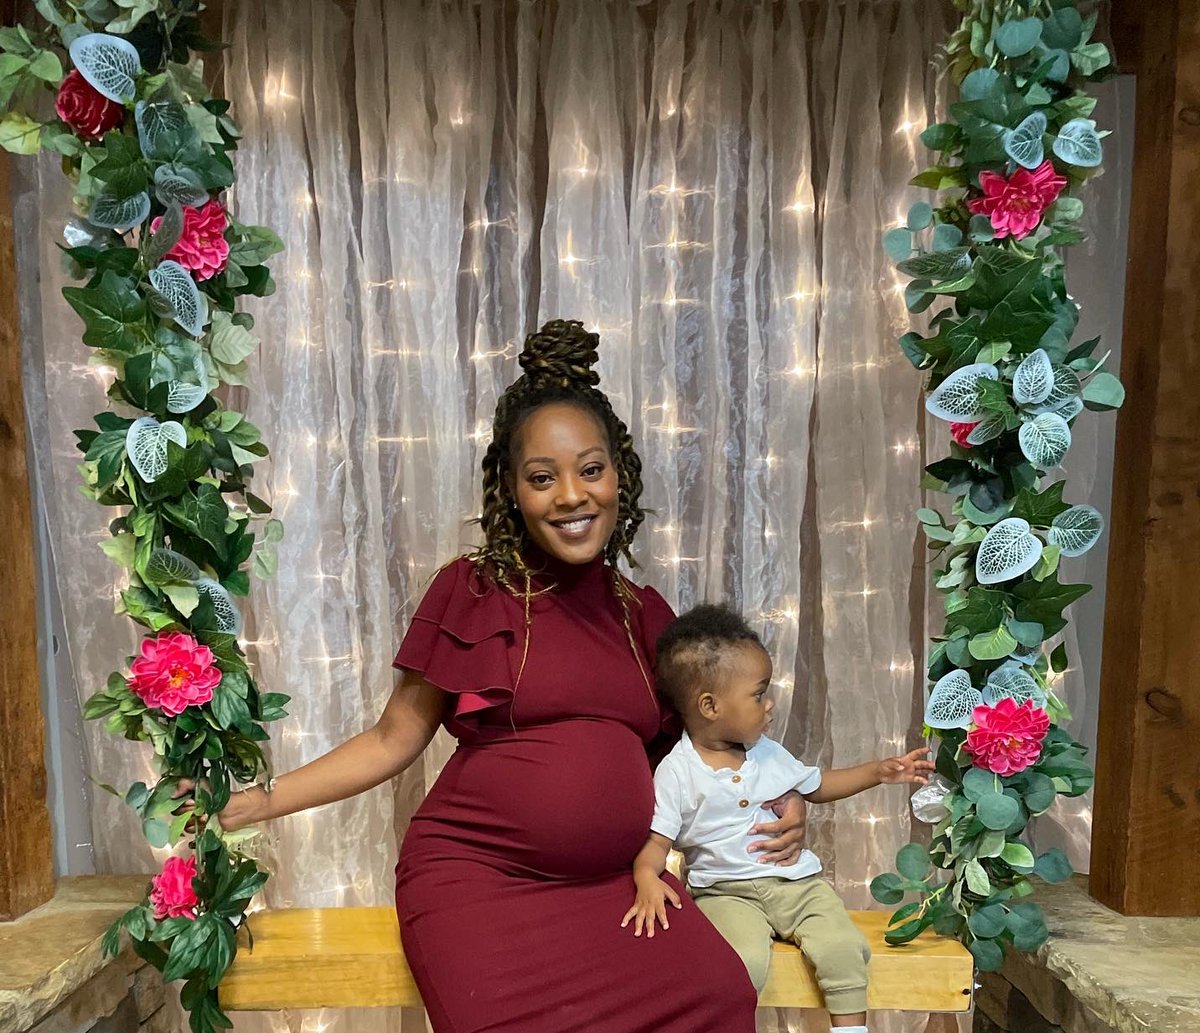 Get you a husband that’s cool with being your photographer 🥰🤗 #family #weddingvibes #love #growth #mommy #thirdtrimester #9daysleft